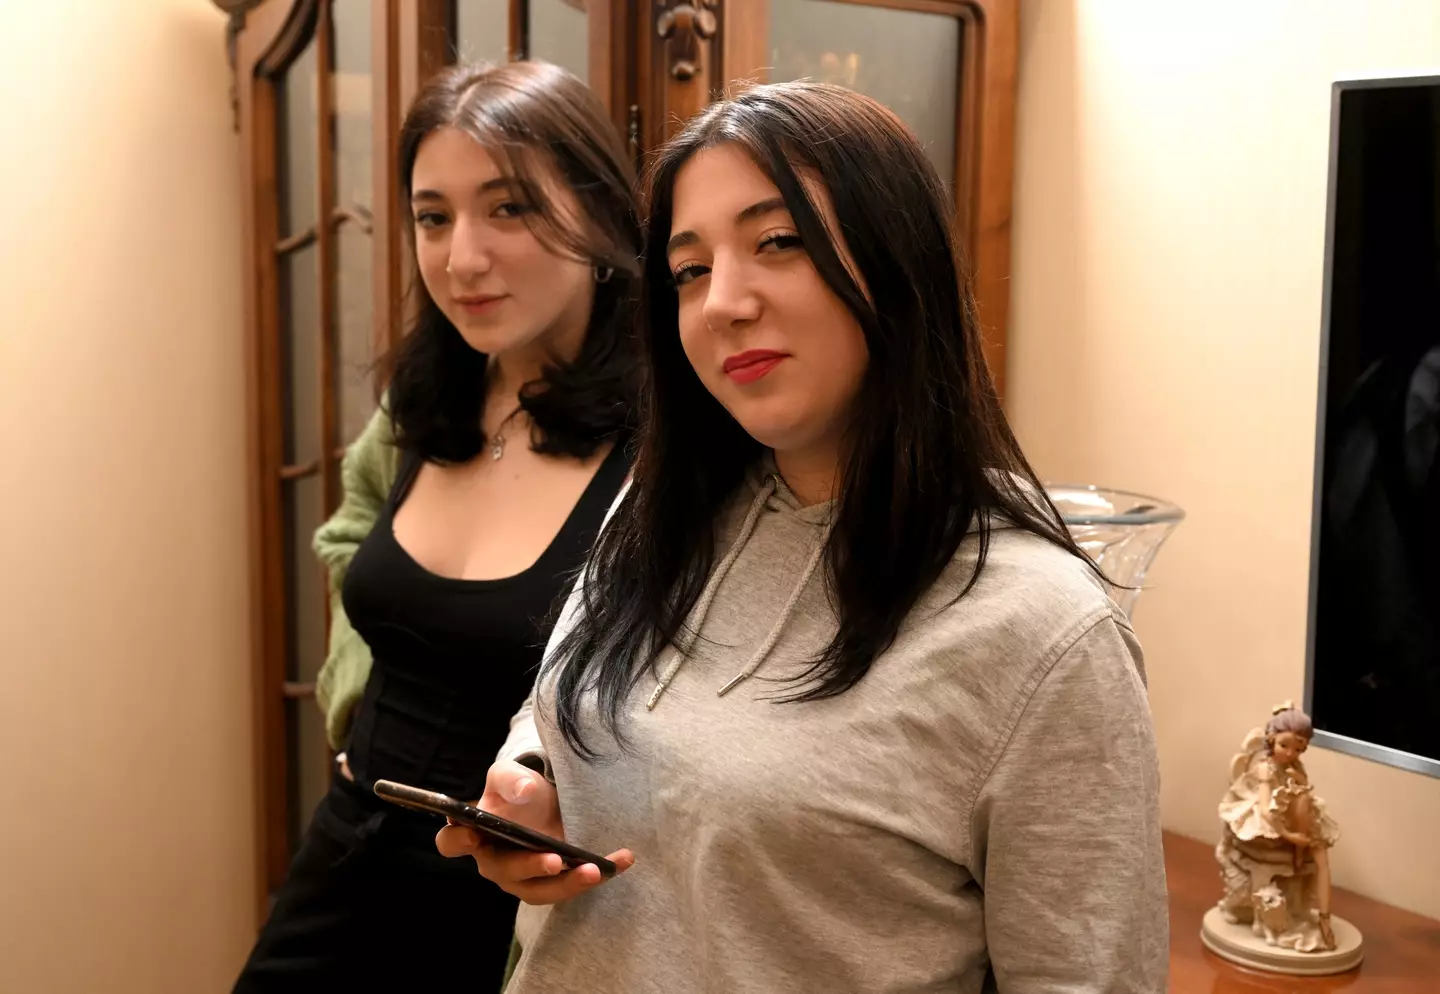 The twins reconnected on TikTok. (VANO SHLAMOV/AFP via Getty Images)